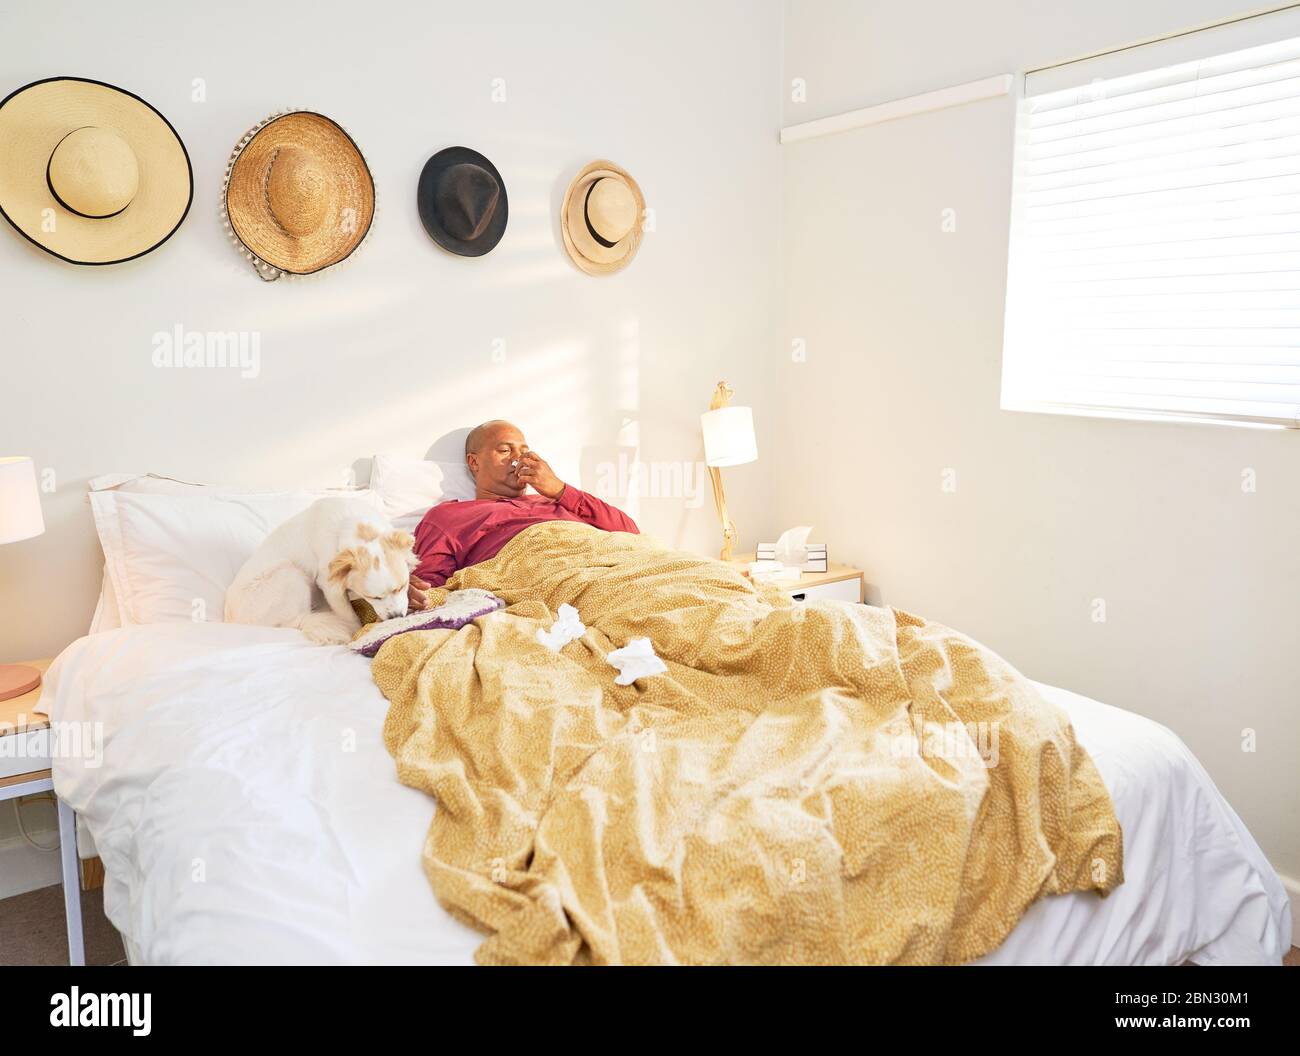 Sick man blowing nose with tissues in bed Stock Photo